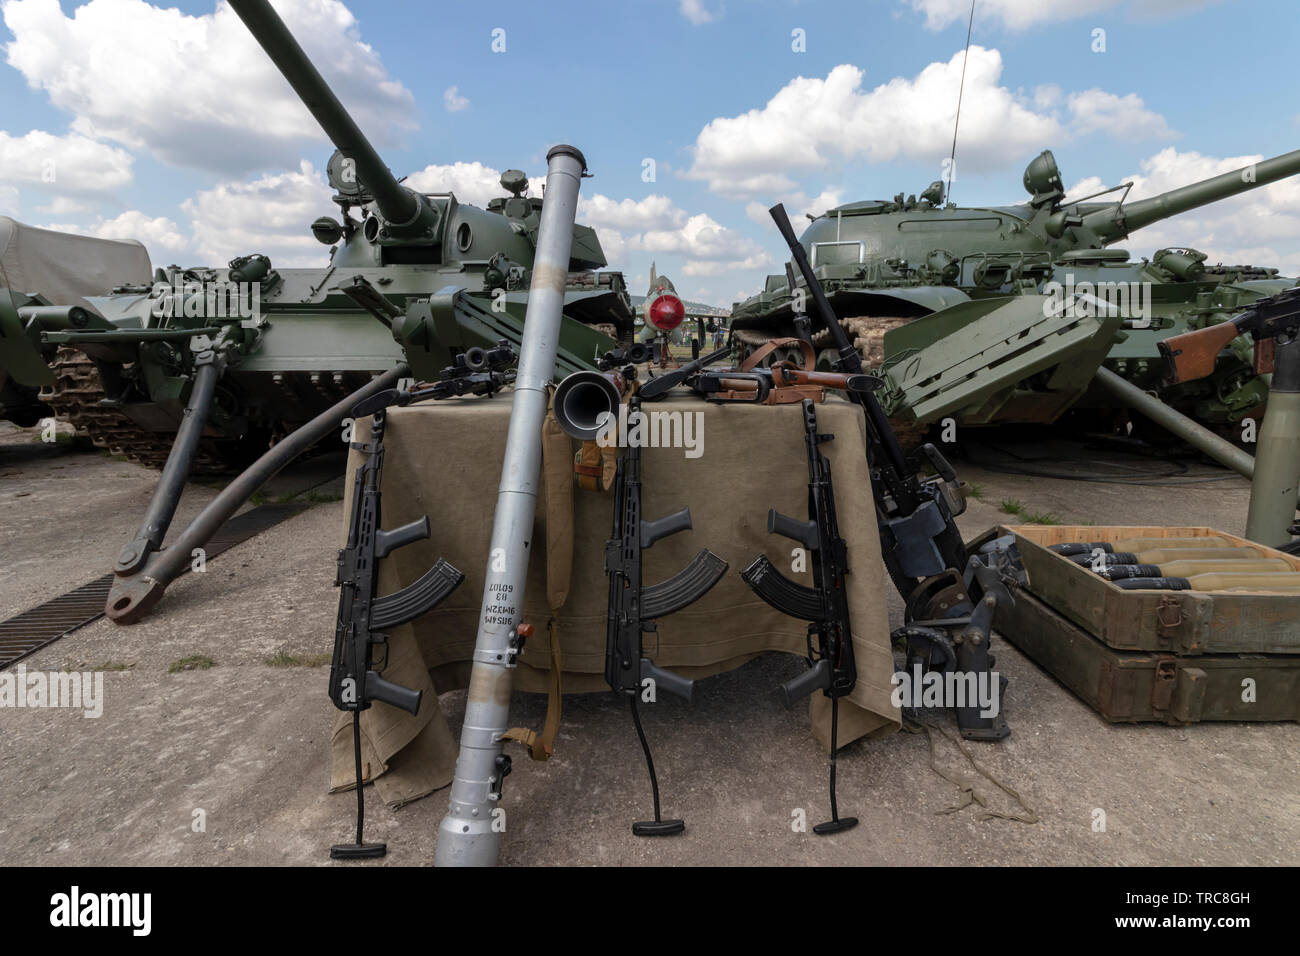 BUDAPEST/HUNGARY - 05.18, 2019: Russian military gear on display: automatic weapons, machine guns, grenade launchers, rpg, tank shells in ammo crates. Stock Photo